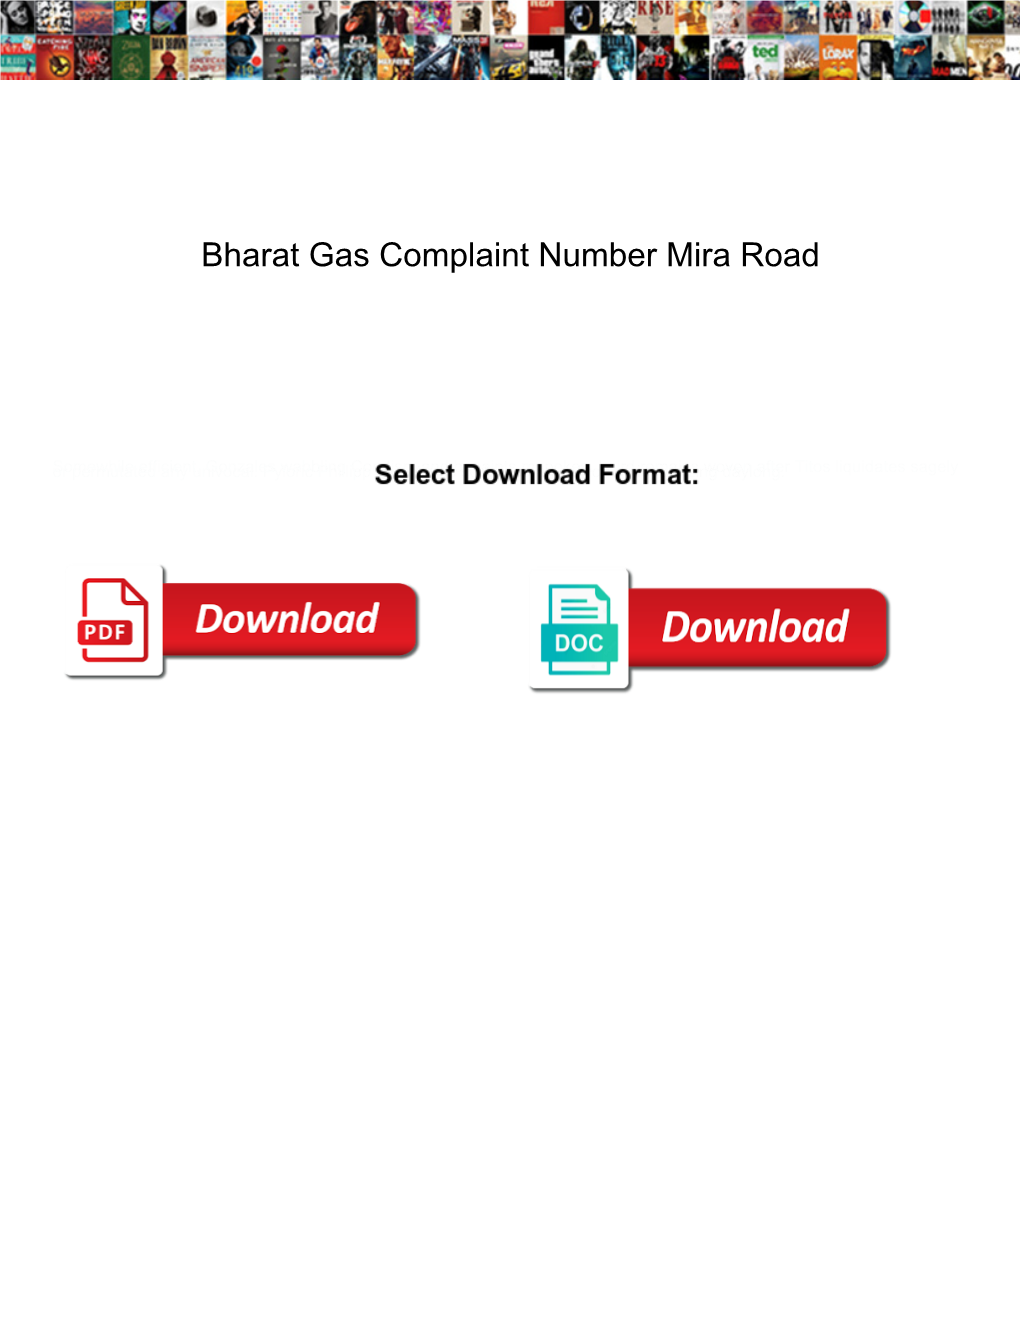 Bharat Gas Complaint Number Mira Road